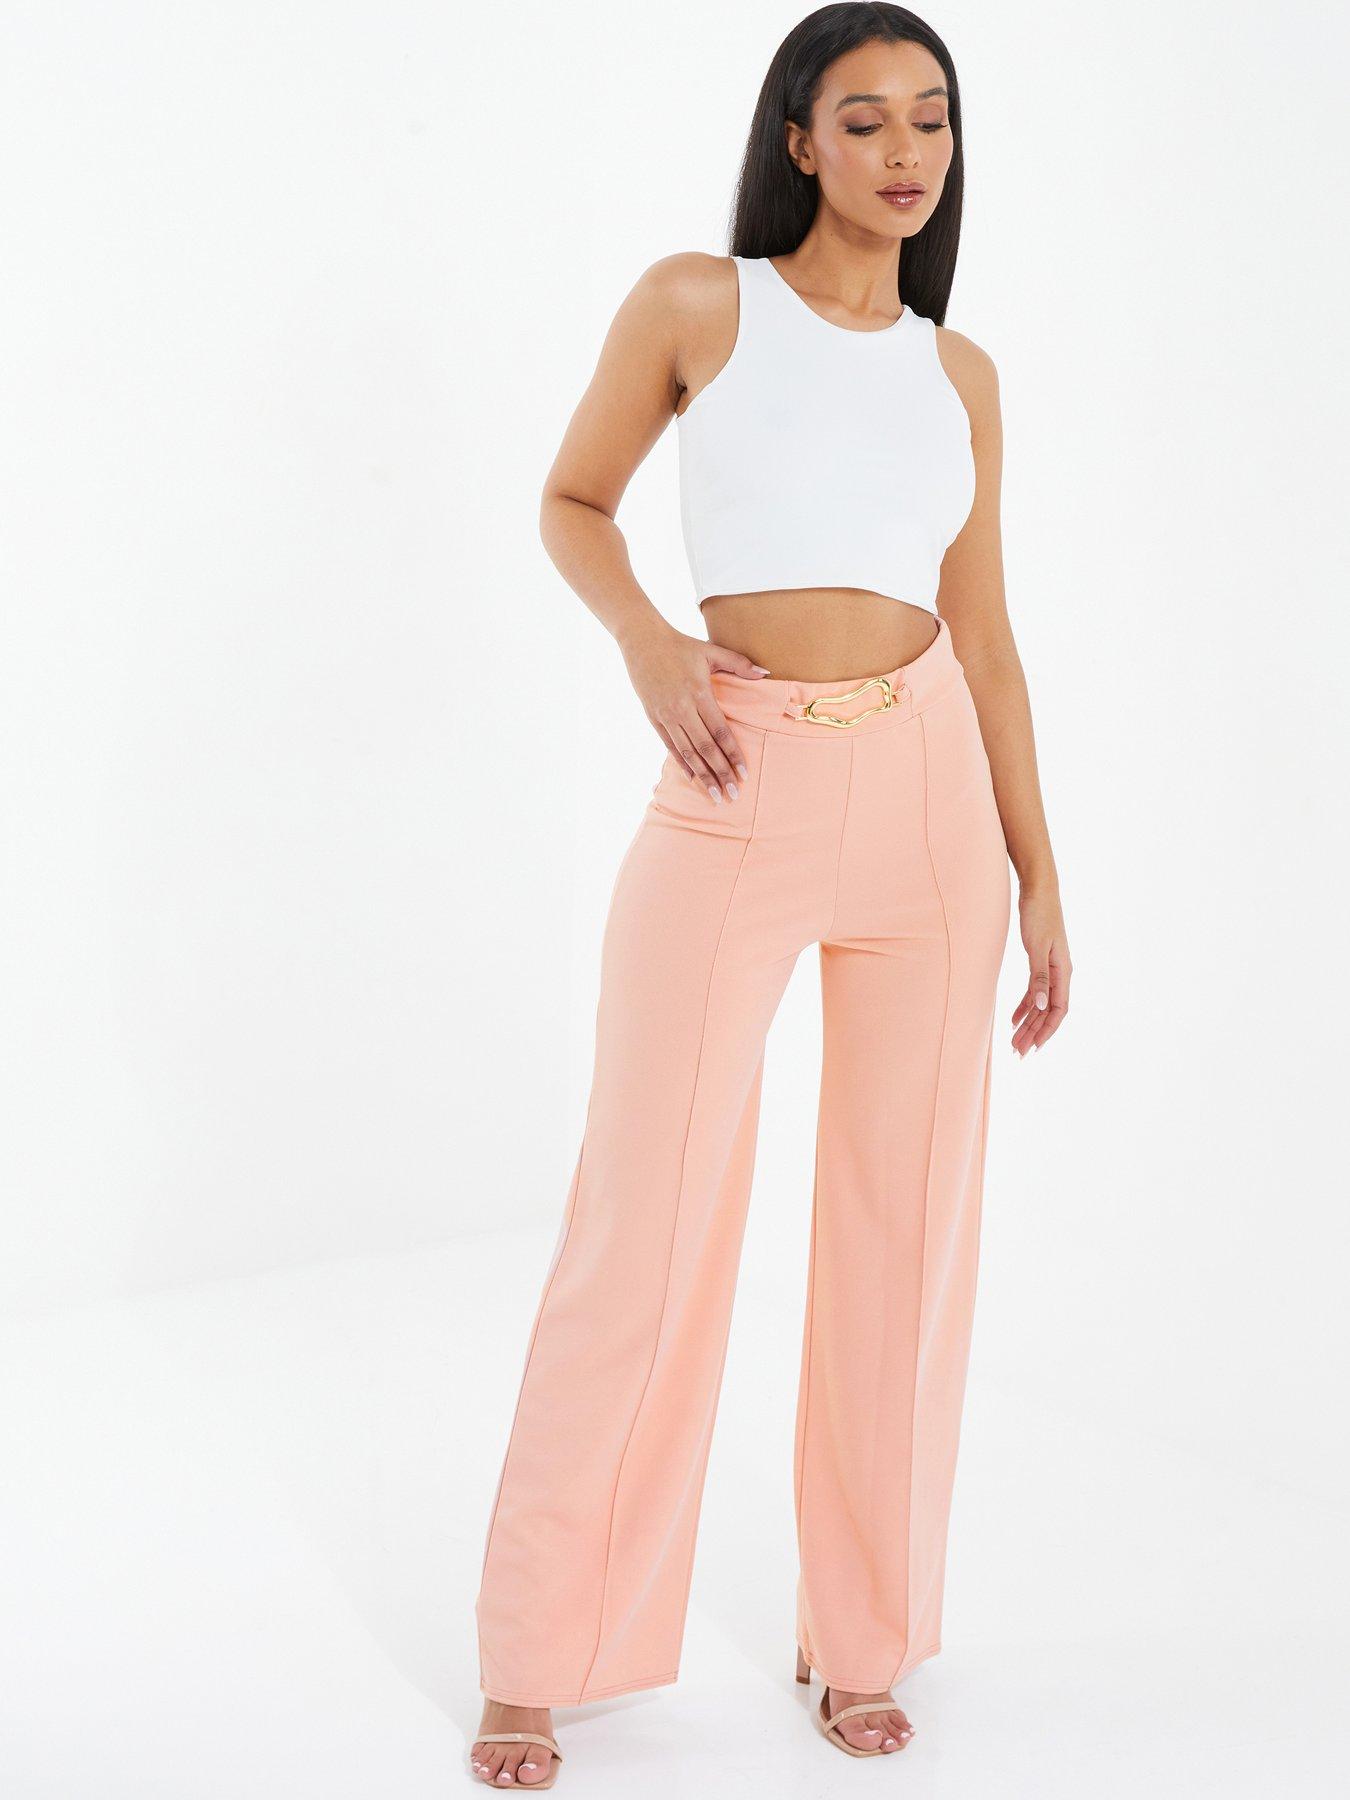 Missguided Red Satin Pleat Front Wide Leg Trousers, $51, Missguided